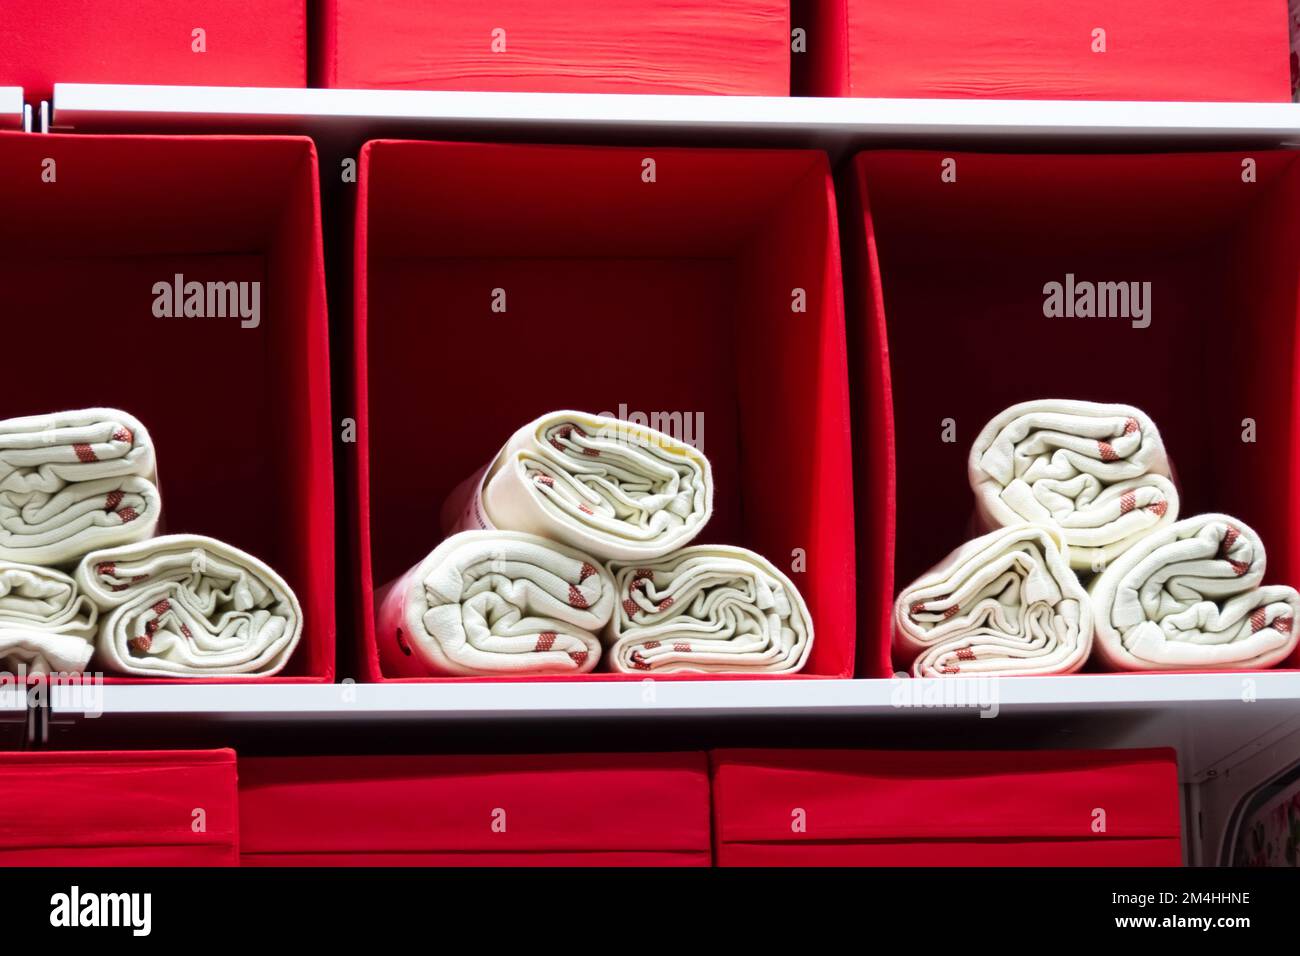 White towels in red boxes on store shelves Stock Photo